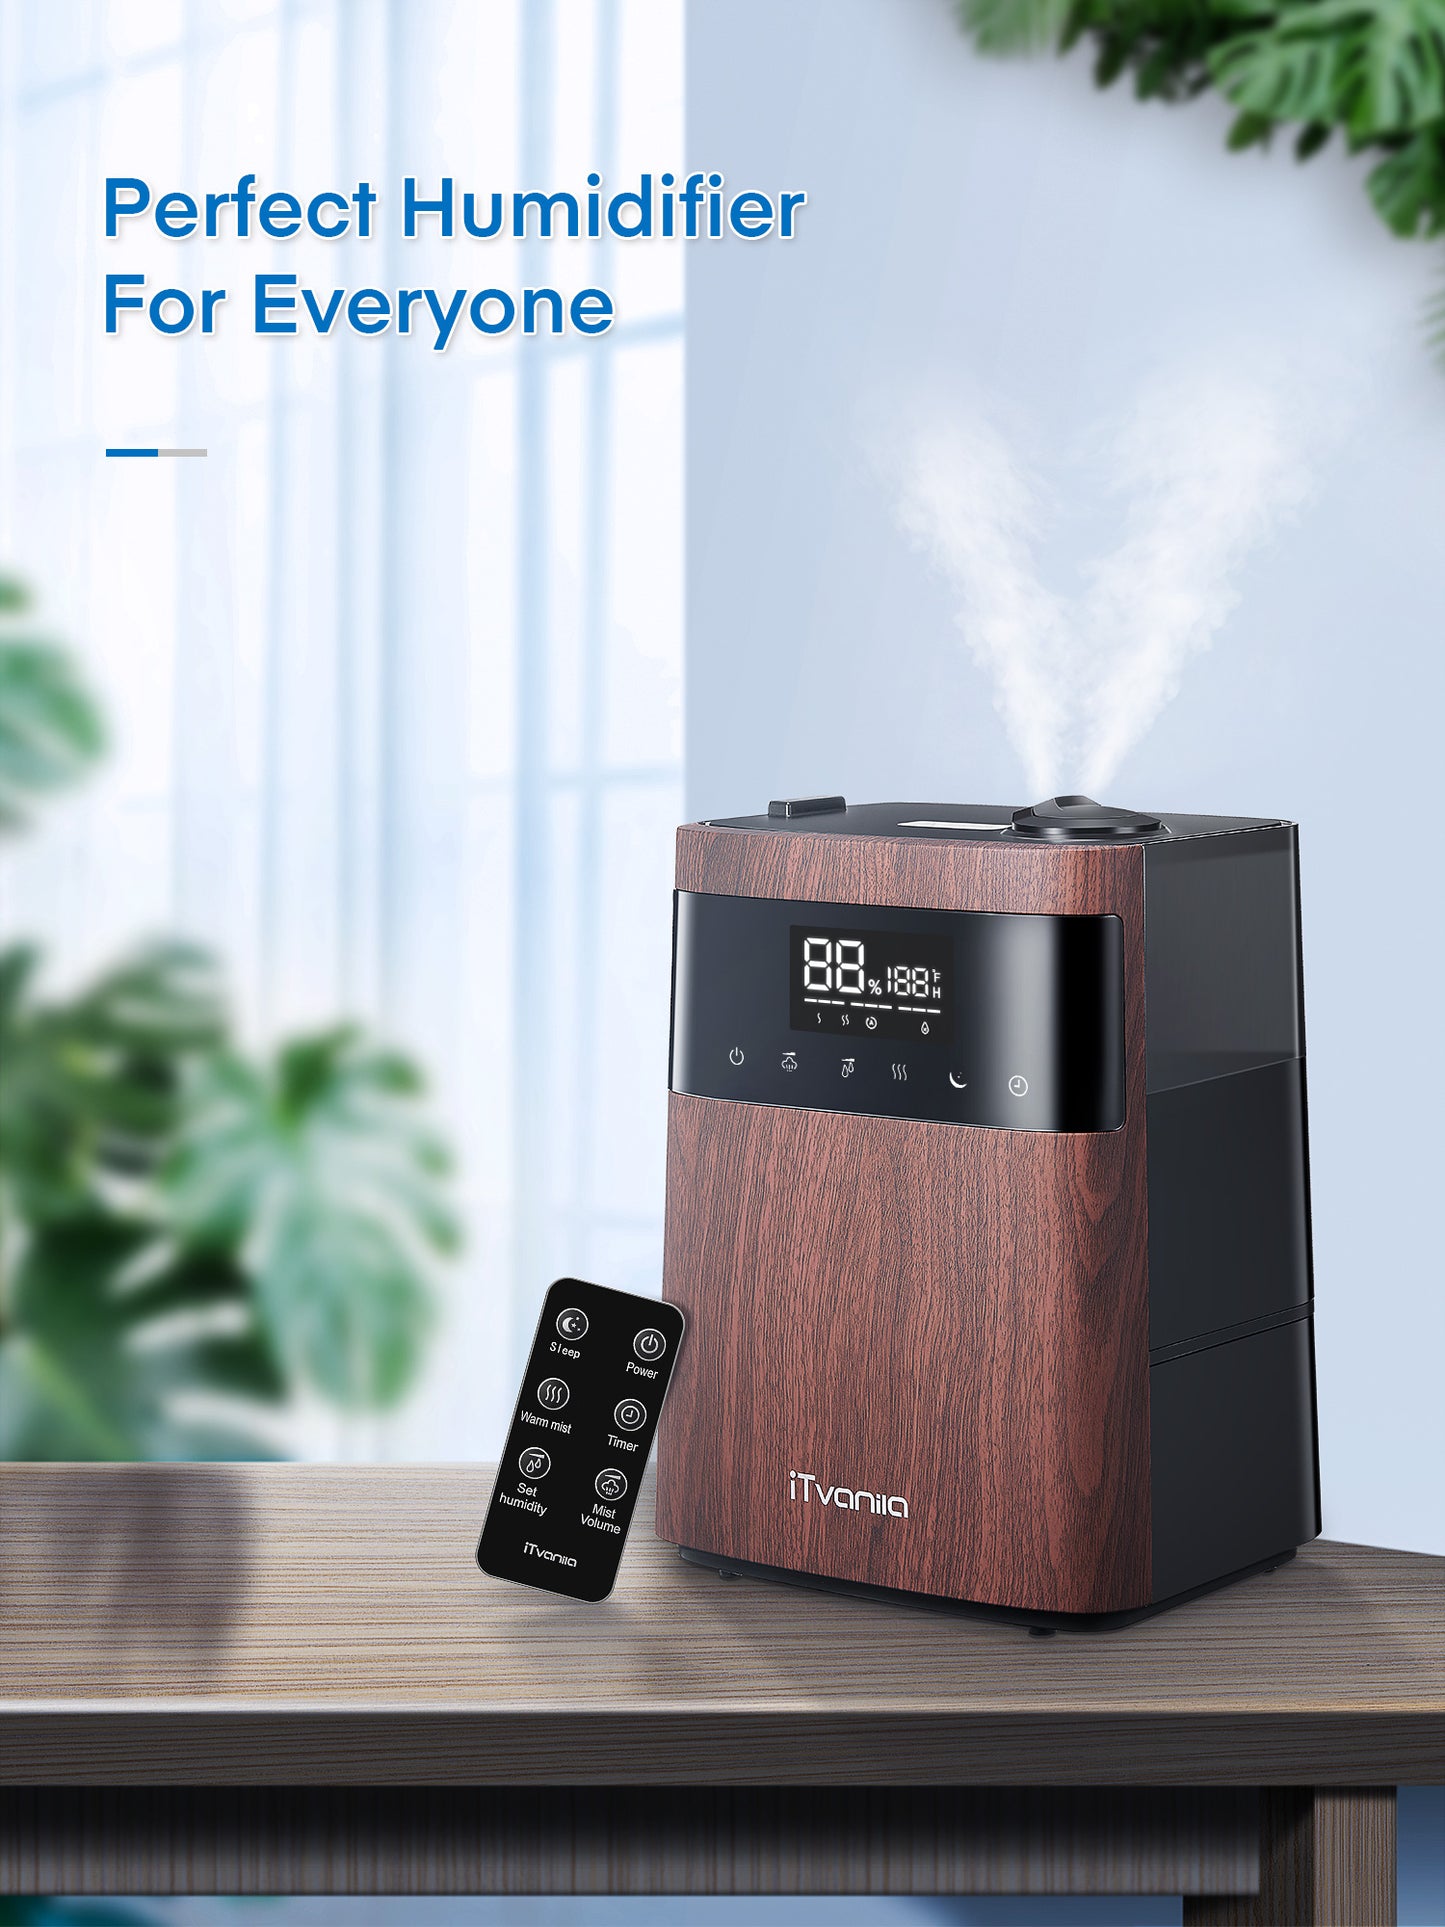 iTvanila Humidifiers for Bedroom Large Room, 5.5L Top Fill Cool and Warm Mist Humidifier for Families Plants with Essential Oil Built-in Humidity Sensor, Humidifiers with Timer Setting Last up t